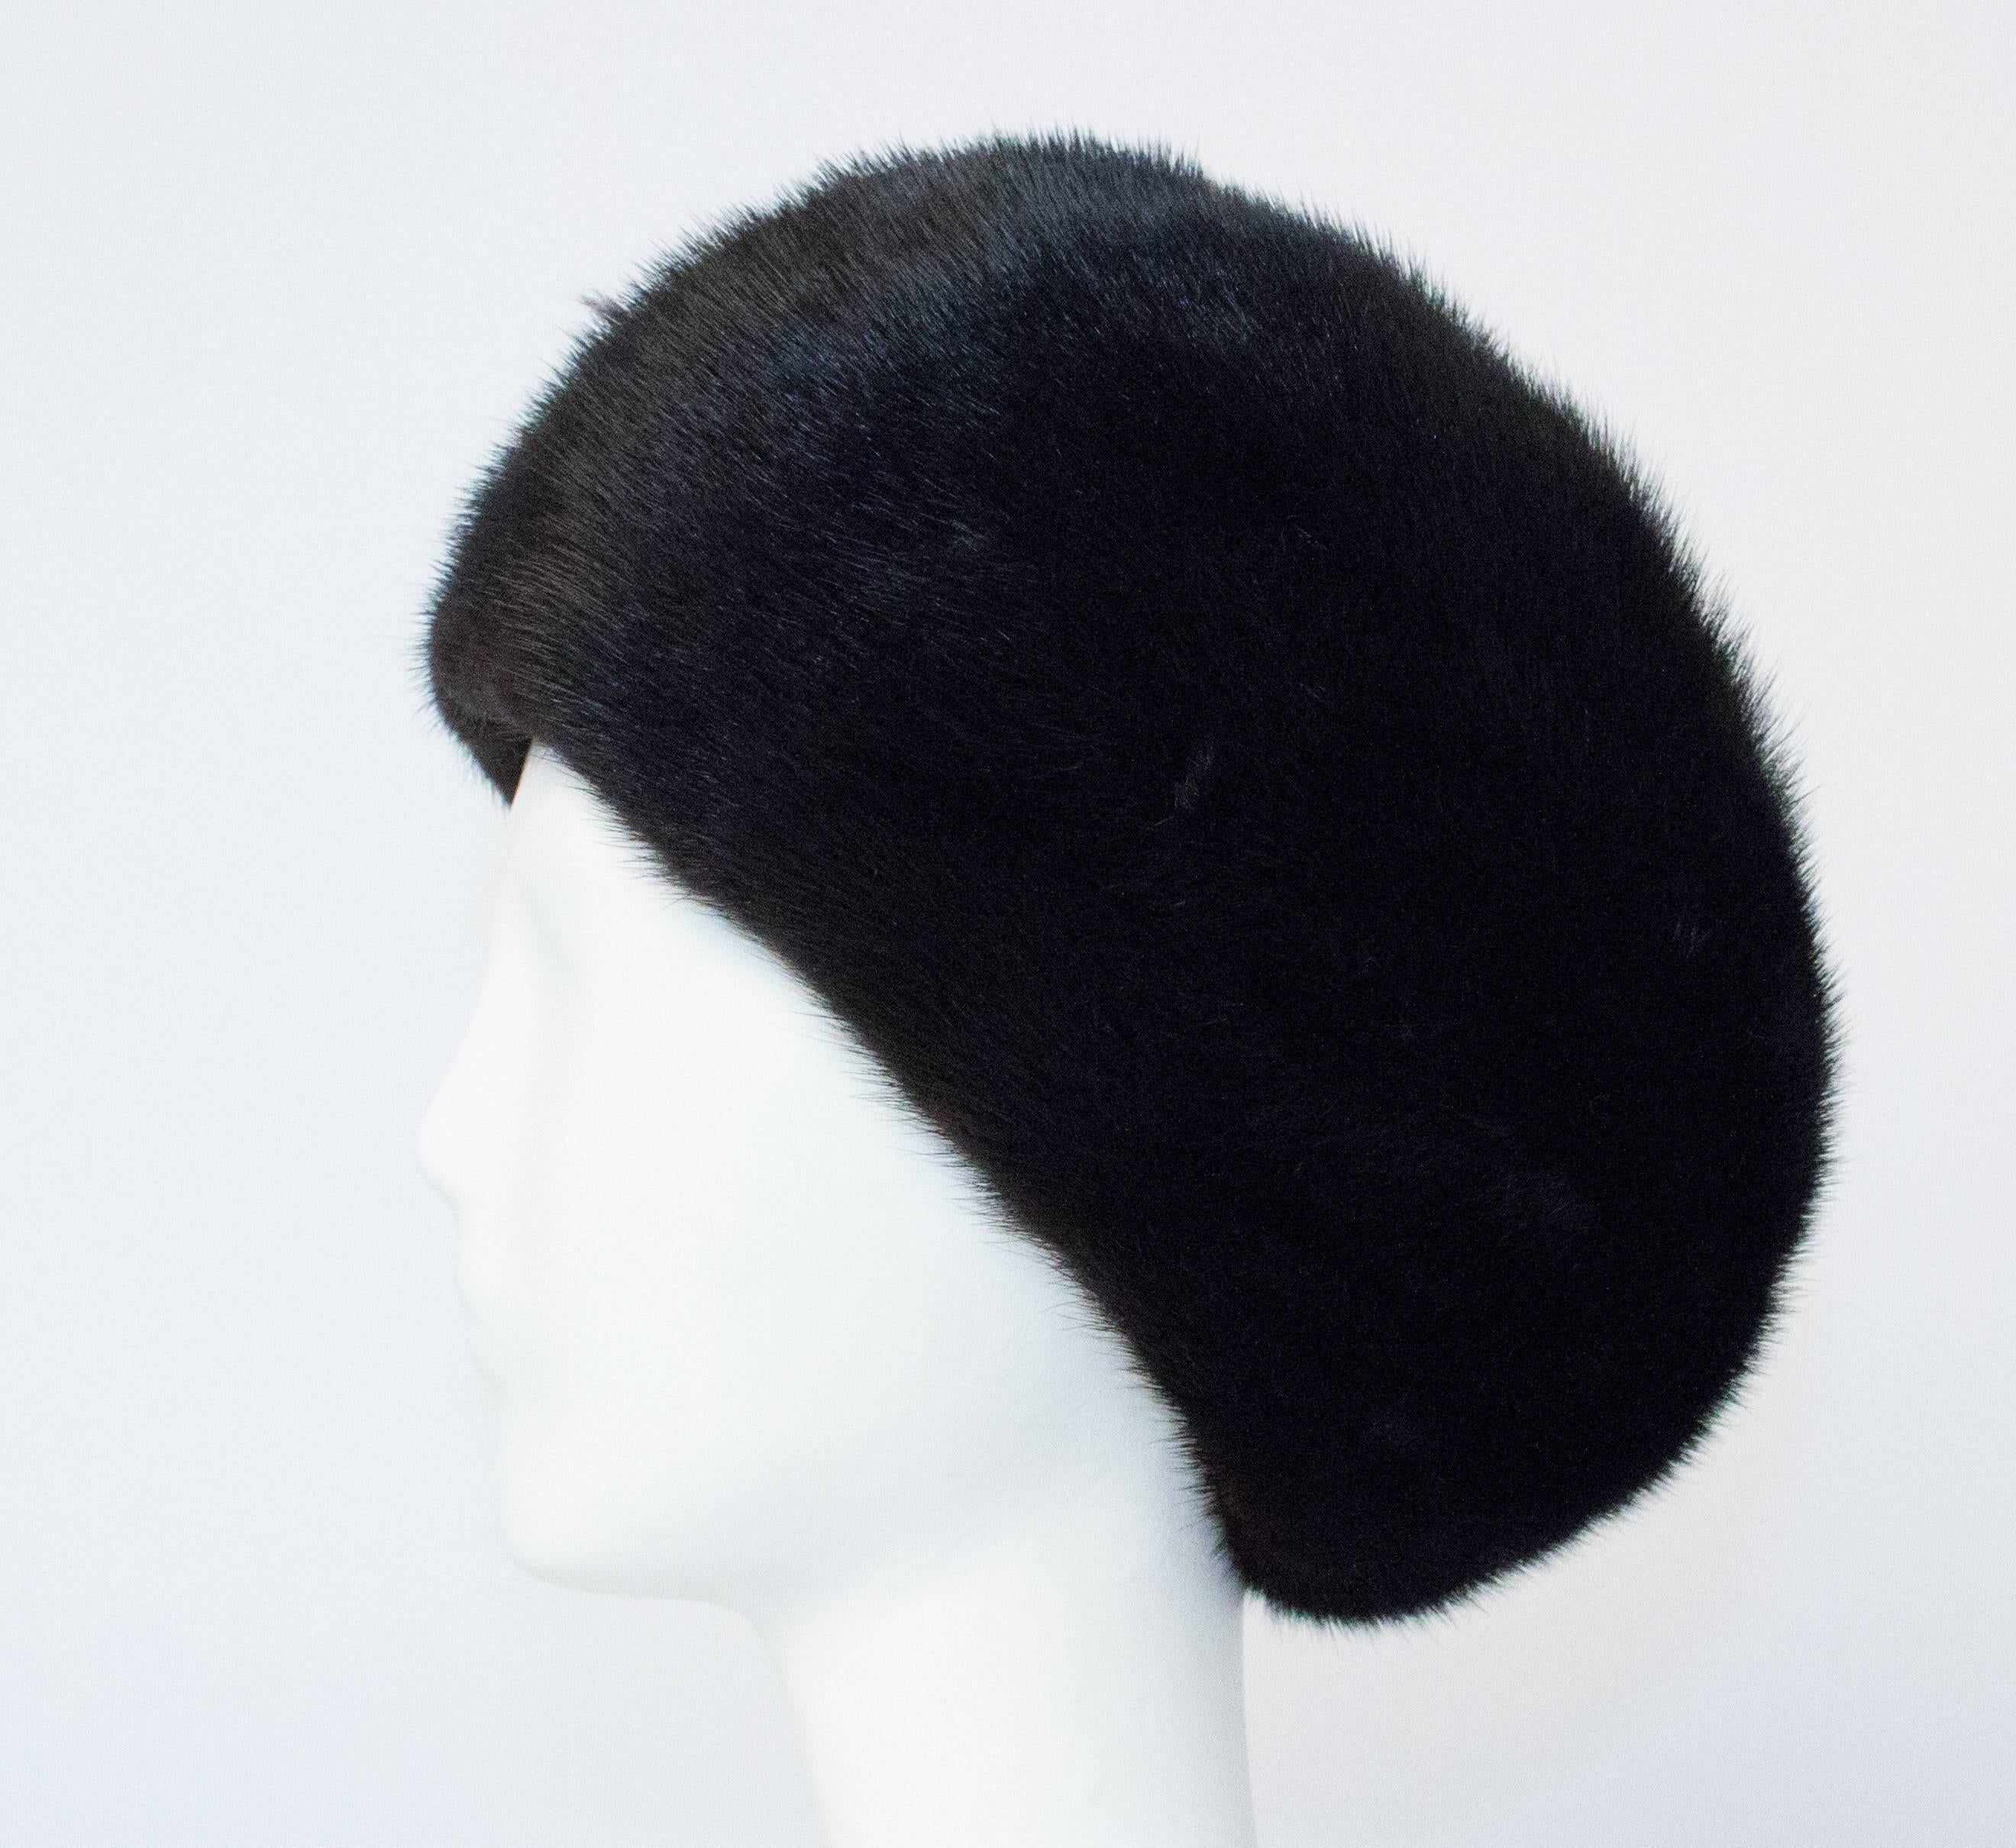 60s Style Ranch Mink Hat. Interior grosgrain band. Lined. 

Measurements:
22 1/4 interior circumference 